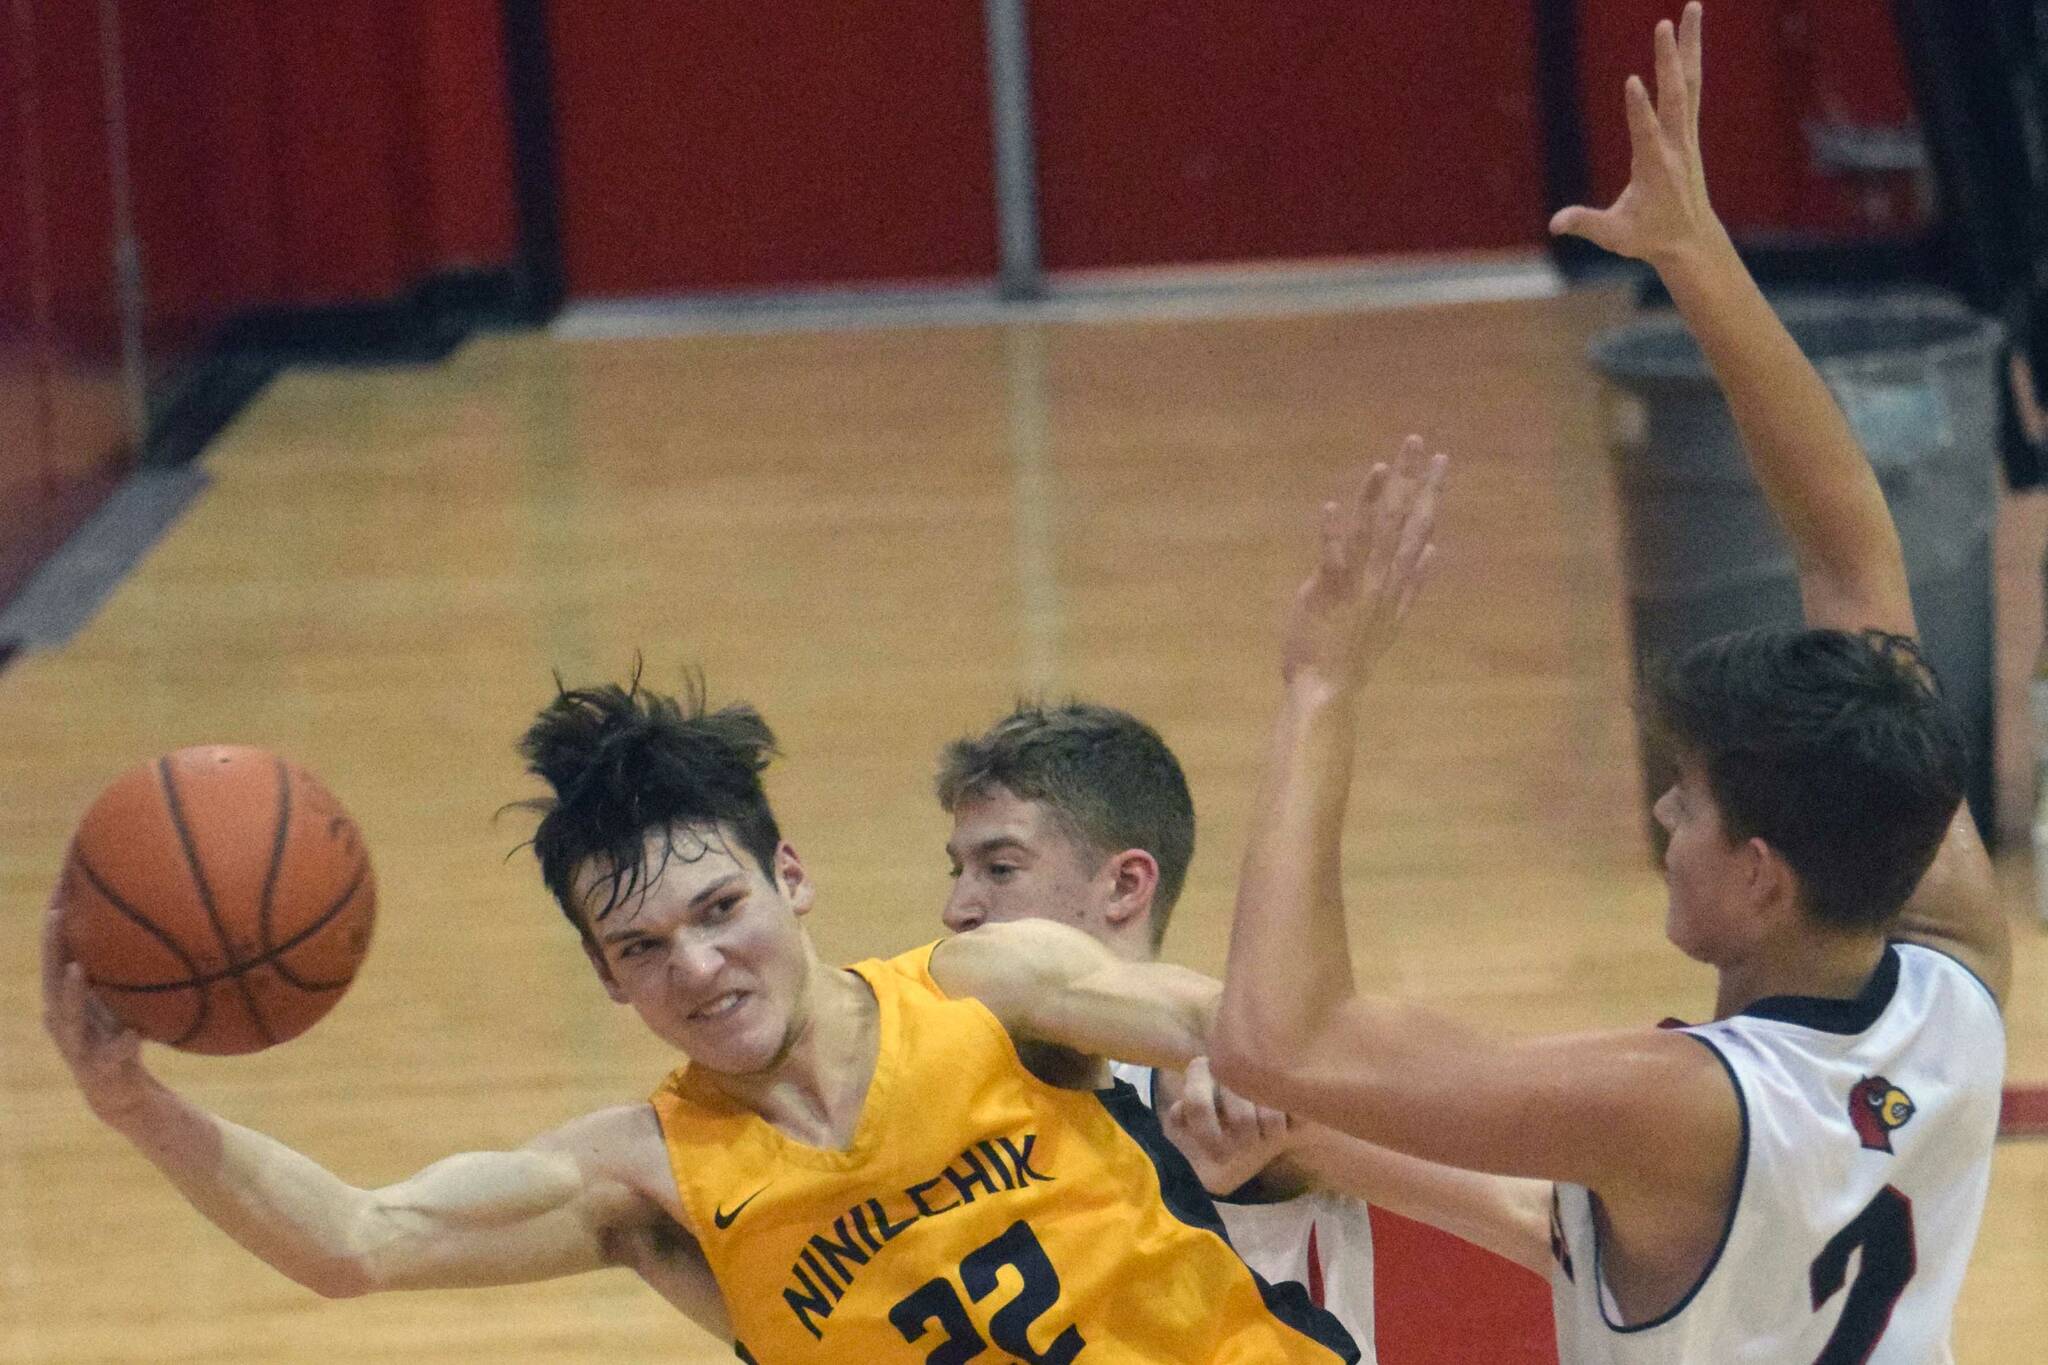 Ninilchik’s Justin Trail saves the ball in front of Kenai Central’s Luke Armstrong and Eli McCubbins on Saturday, March 5, 2022, at Kenai Central High School in Kenai, Alaska. (Photo by Jeff Helminiak/Peninsula Clarion)